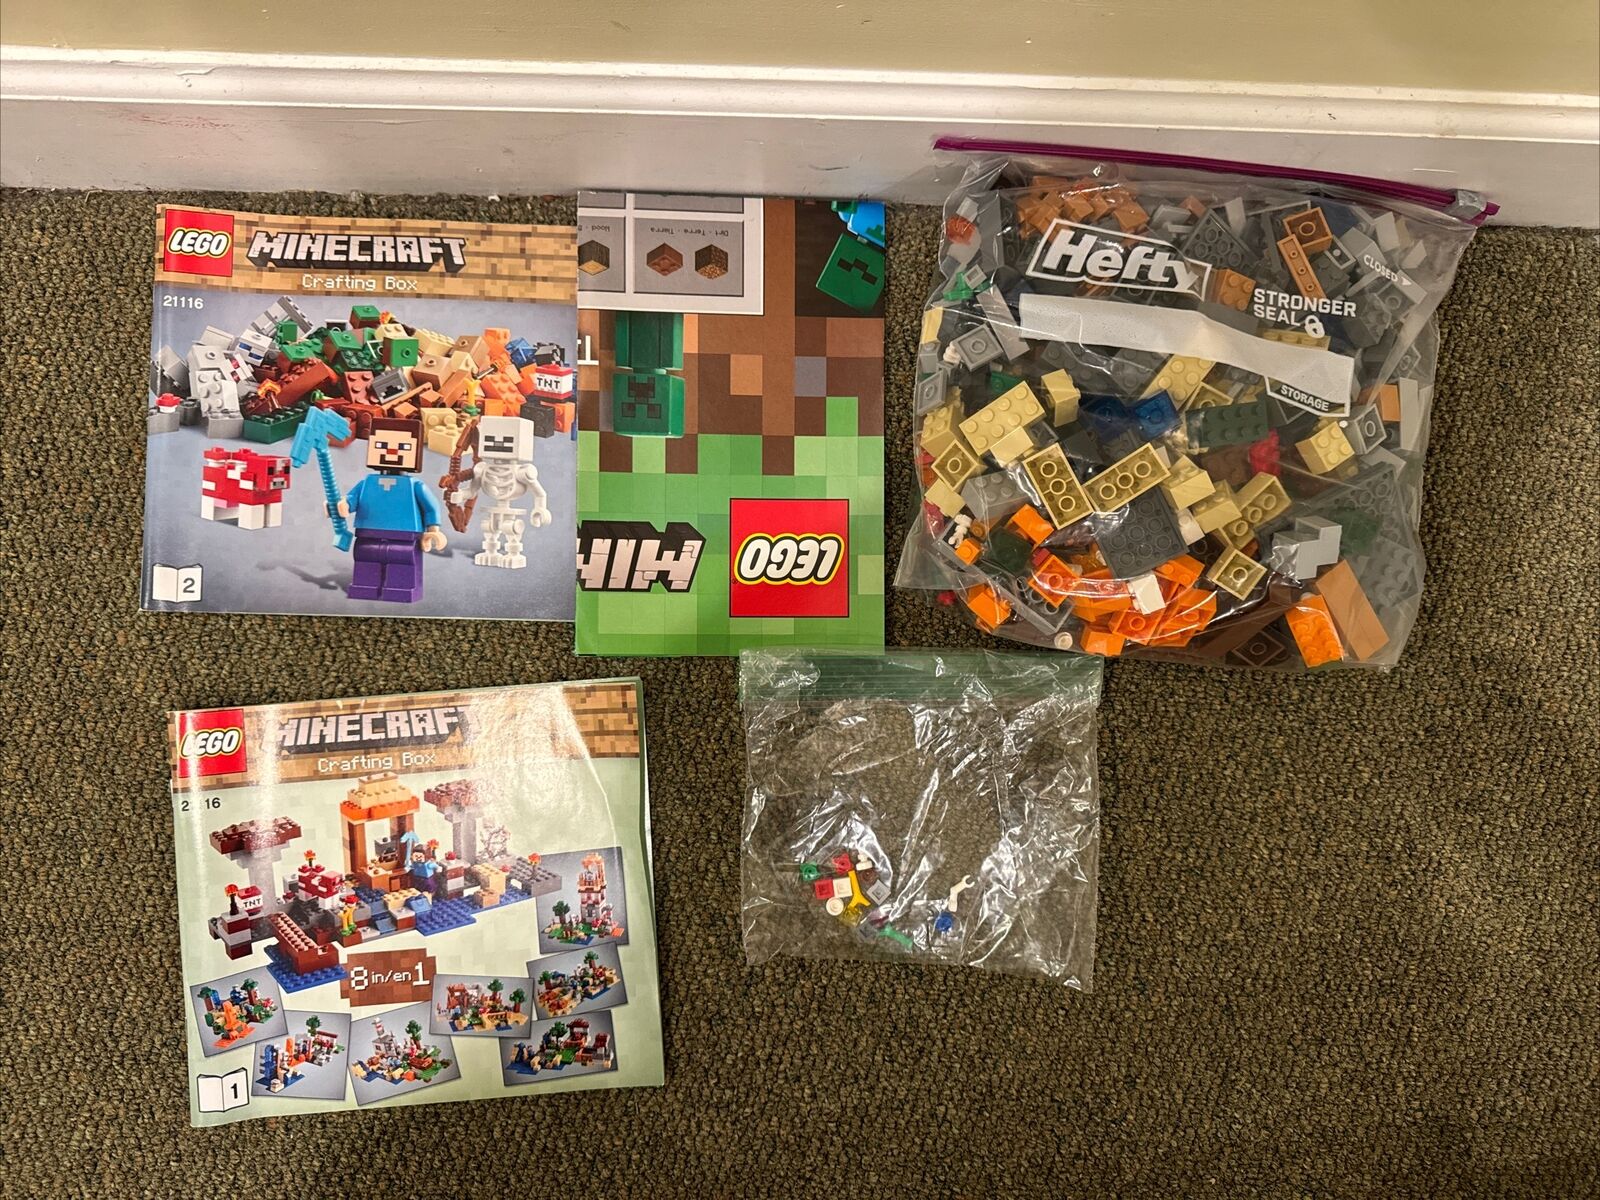 LEGO 21116 Minecraft Crafting Box  2014 100% Complete inventoried